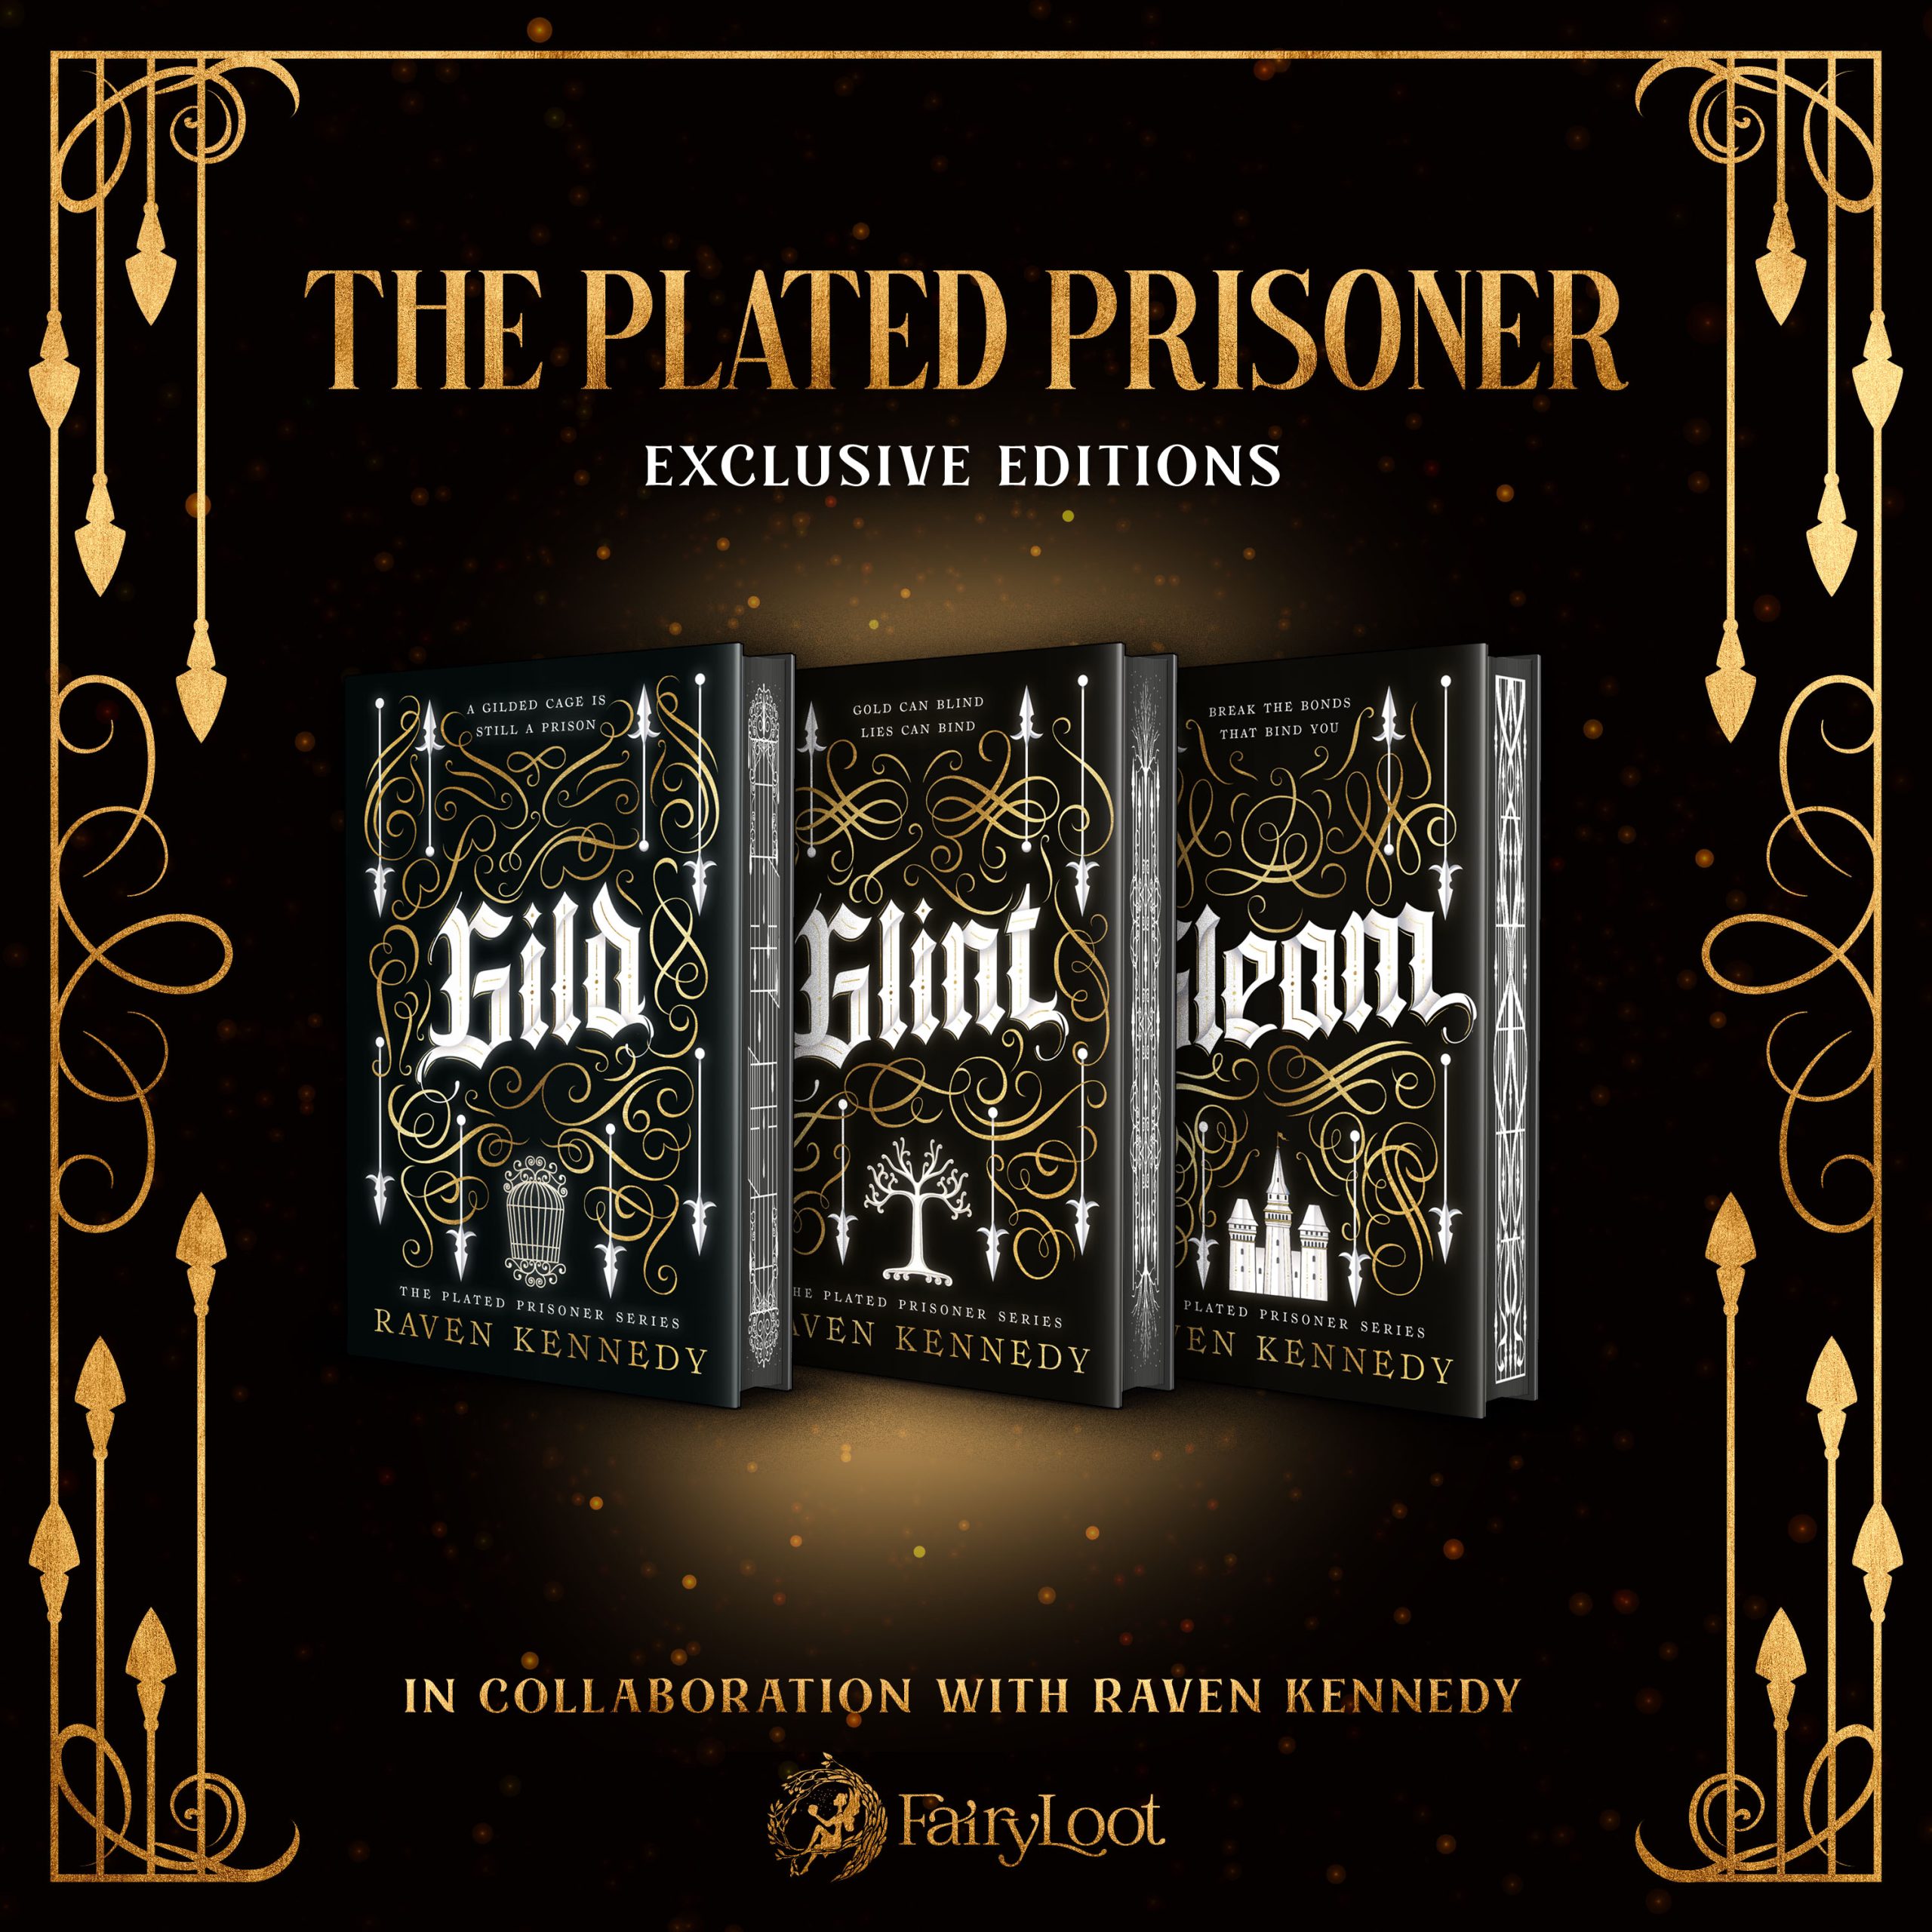 The Plated Prisoner Exclusive Editions